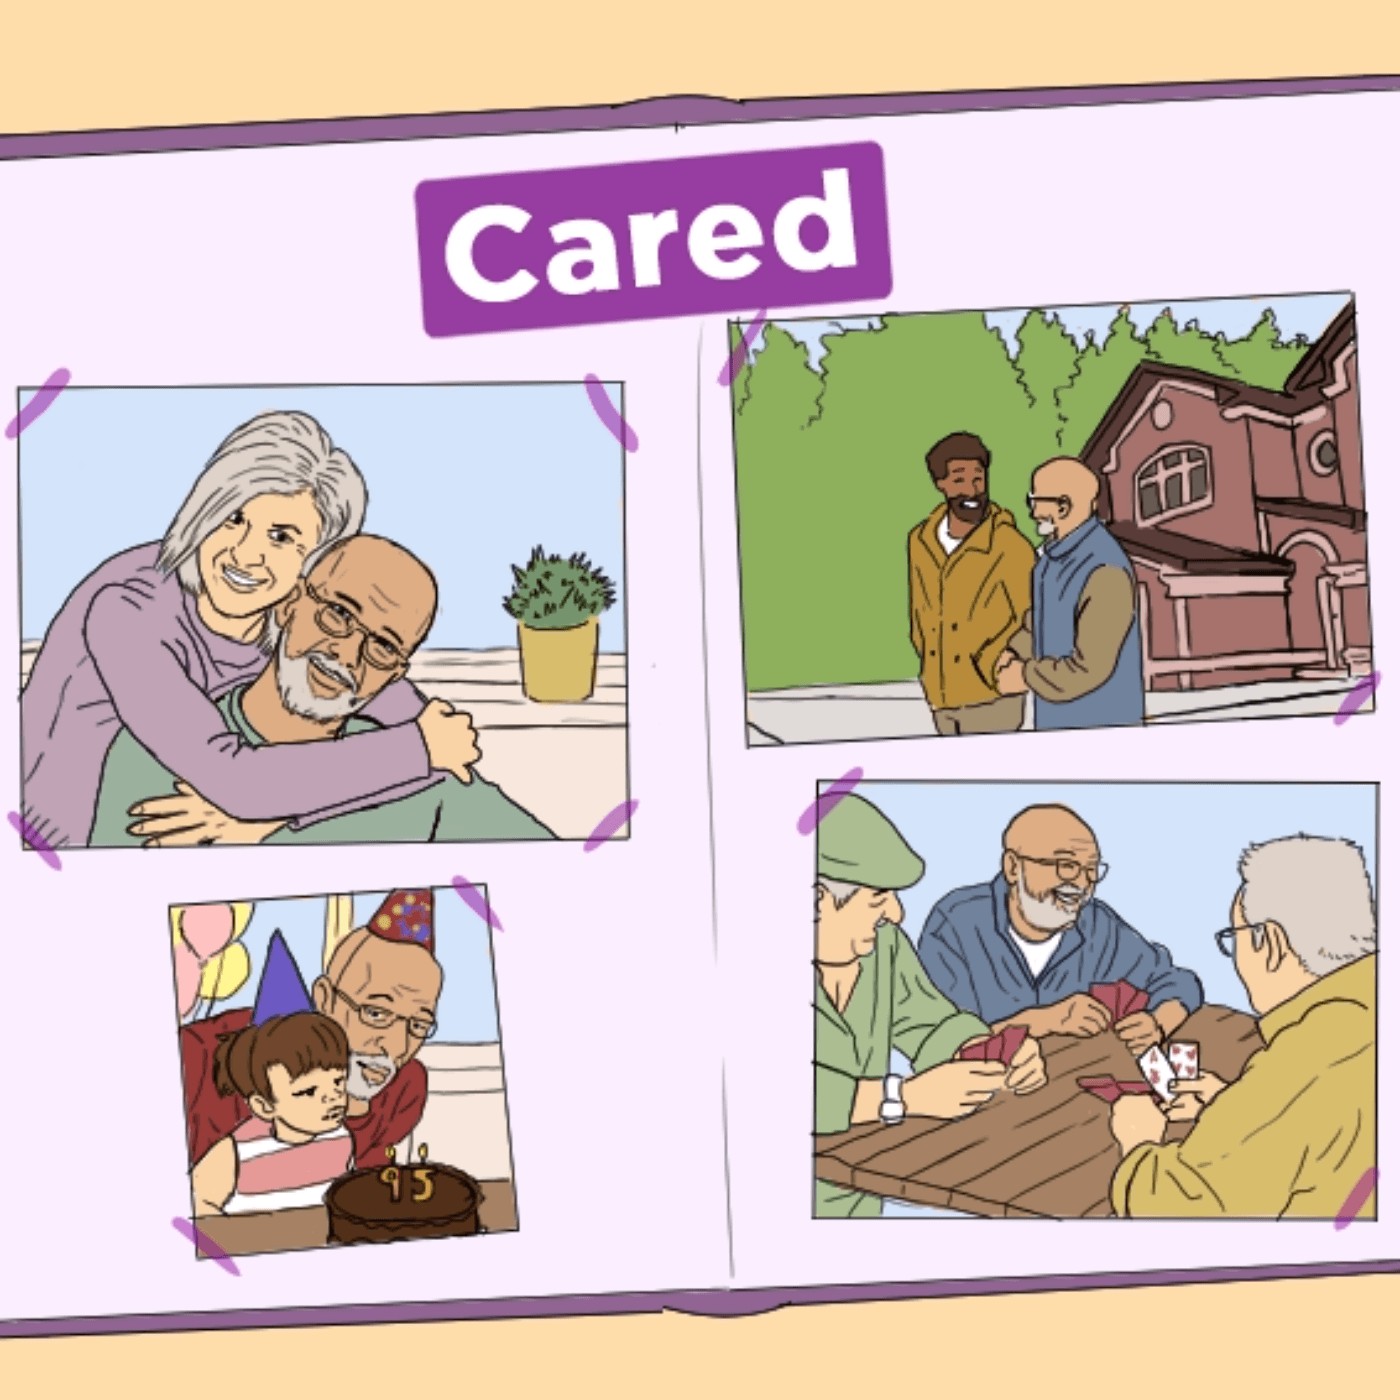 Thumbnail for "Cared: The Last Decades Of Our Lives".